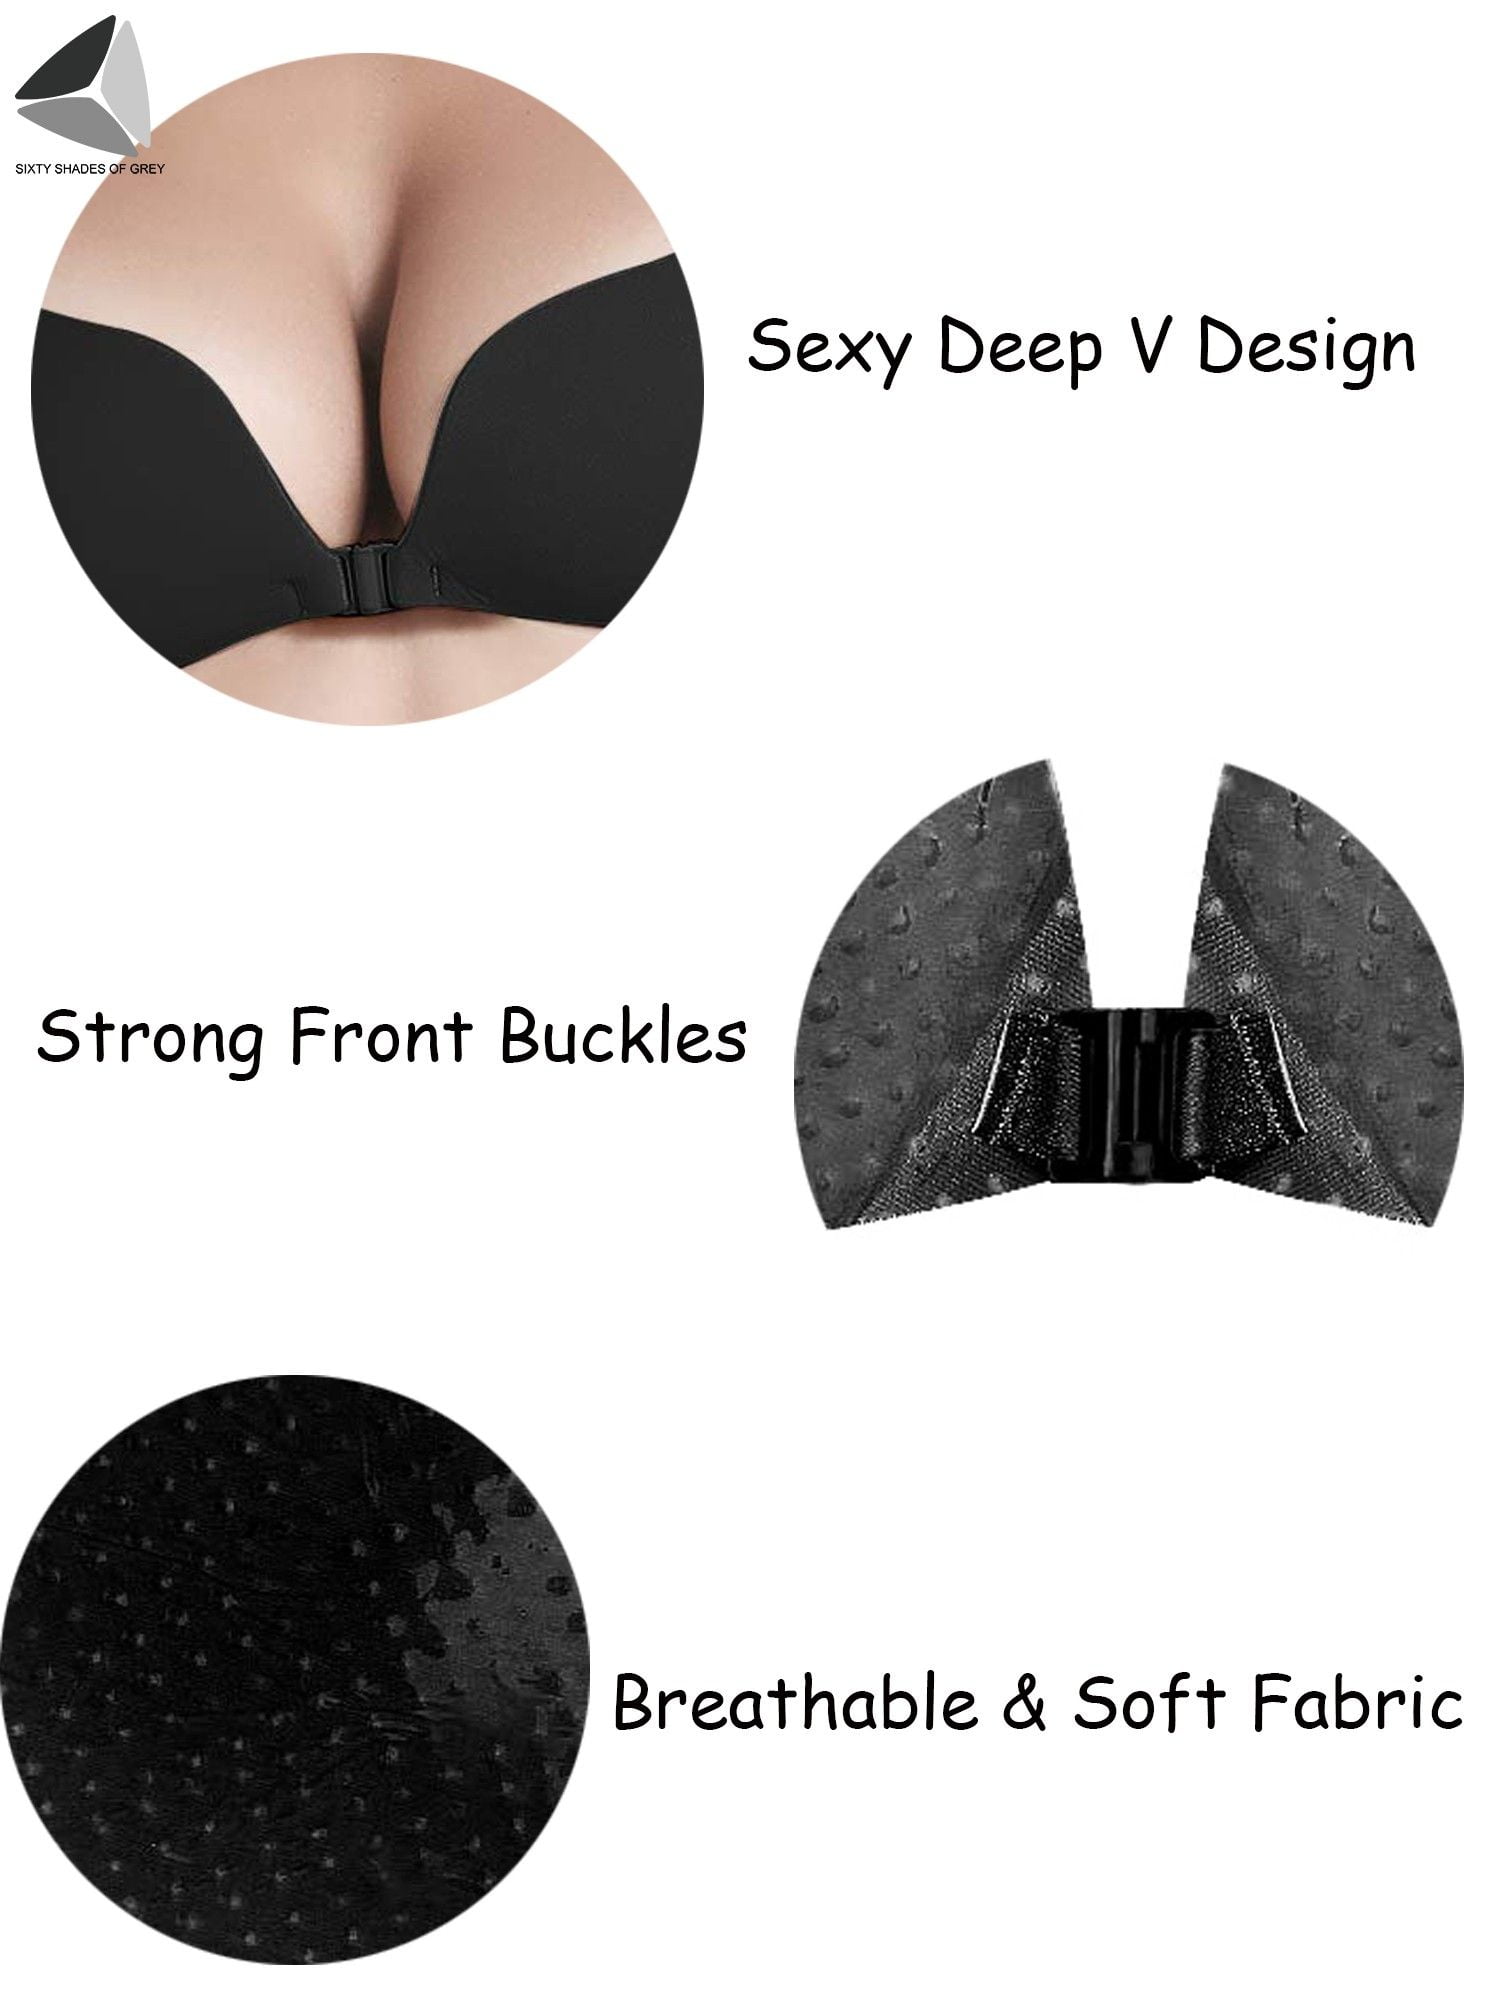 Women Invisible Bras Butterfly Wing Silicone Sexy Bra Adhesive Bras  Strapless Backless Self Bras Shell Push Up Bra LDH198 From Fashion_god,  $3.71